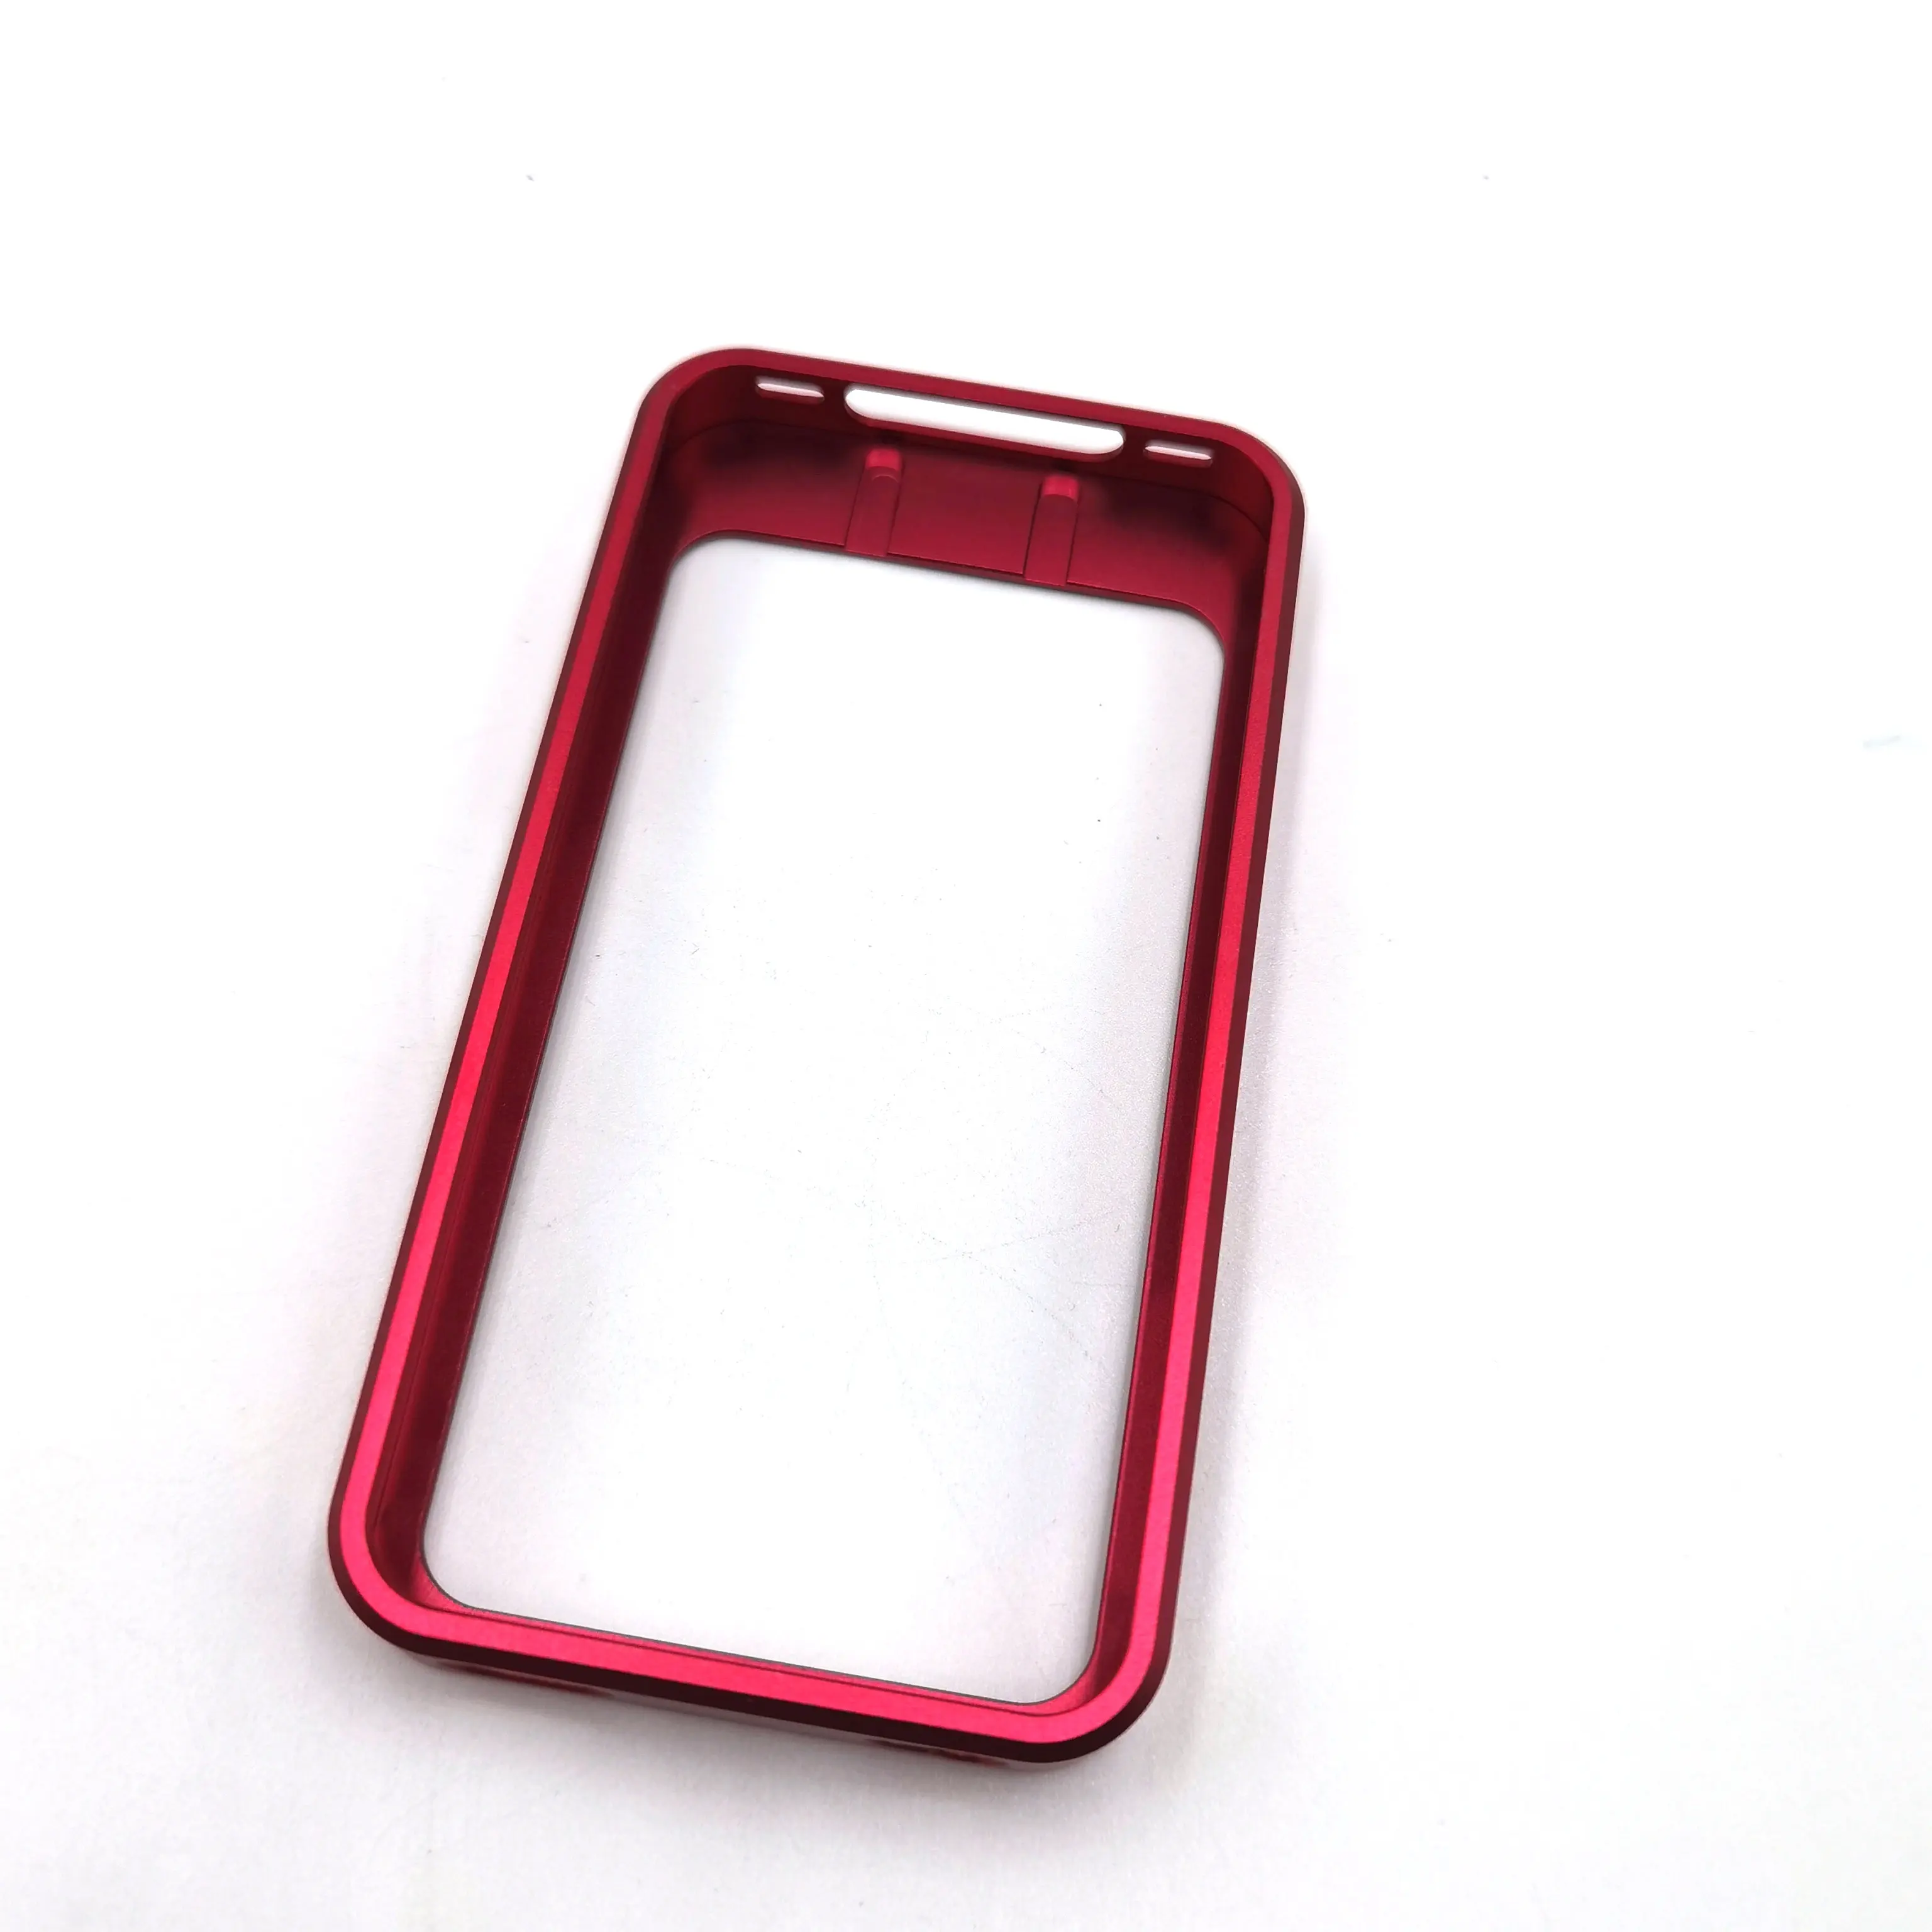 Customized anodizing products producing phone aluminium frame electrical products protect frame